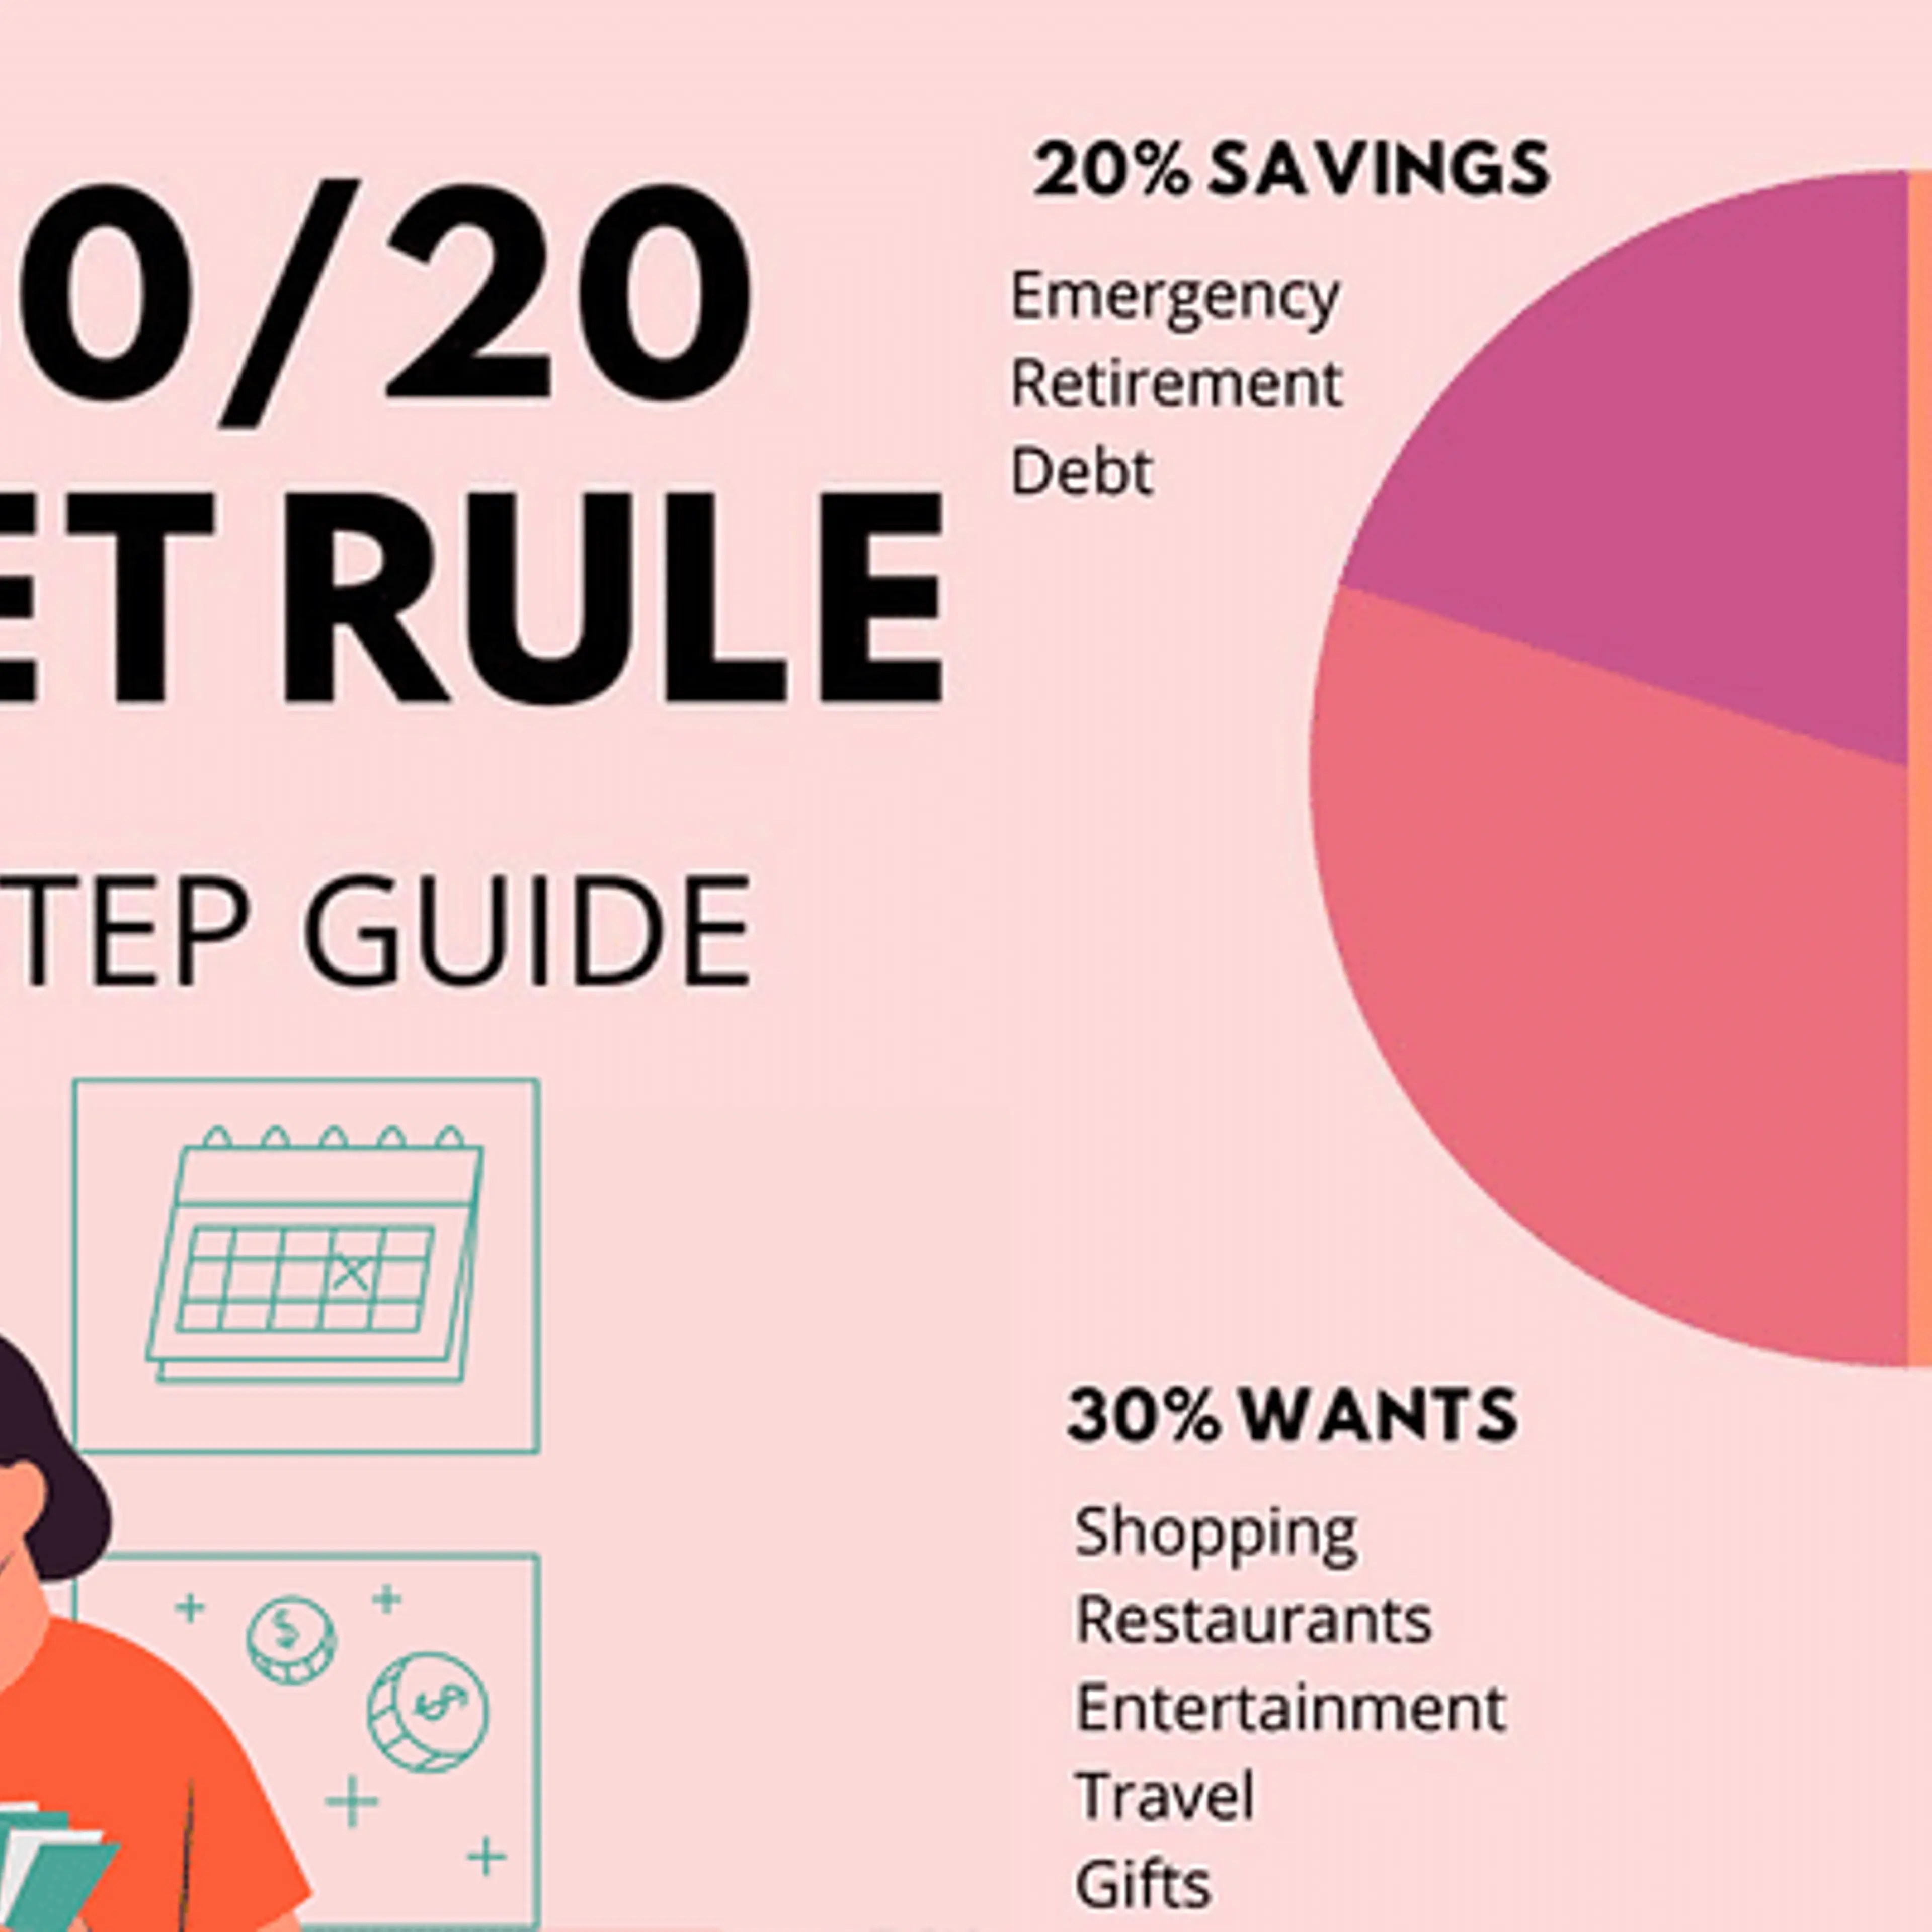 The 50/30/20 Budget Rule: A Step-by-Step Guide to Smarter Spending